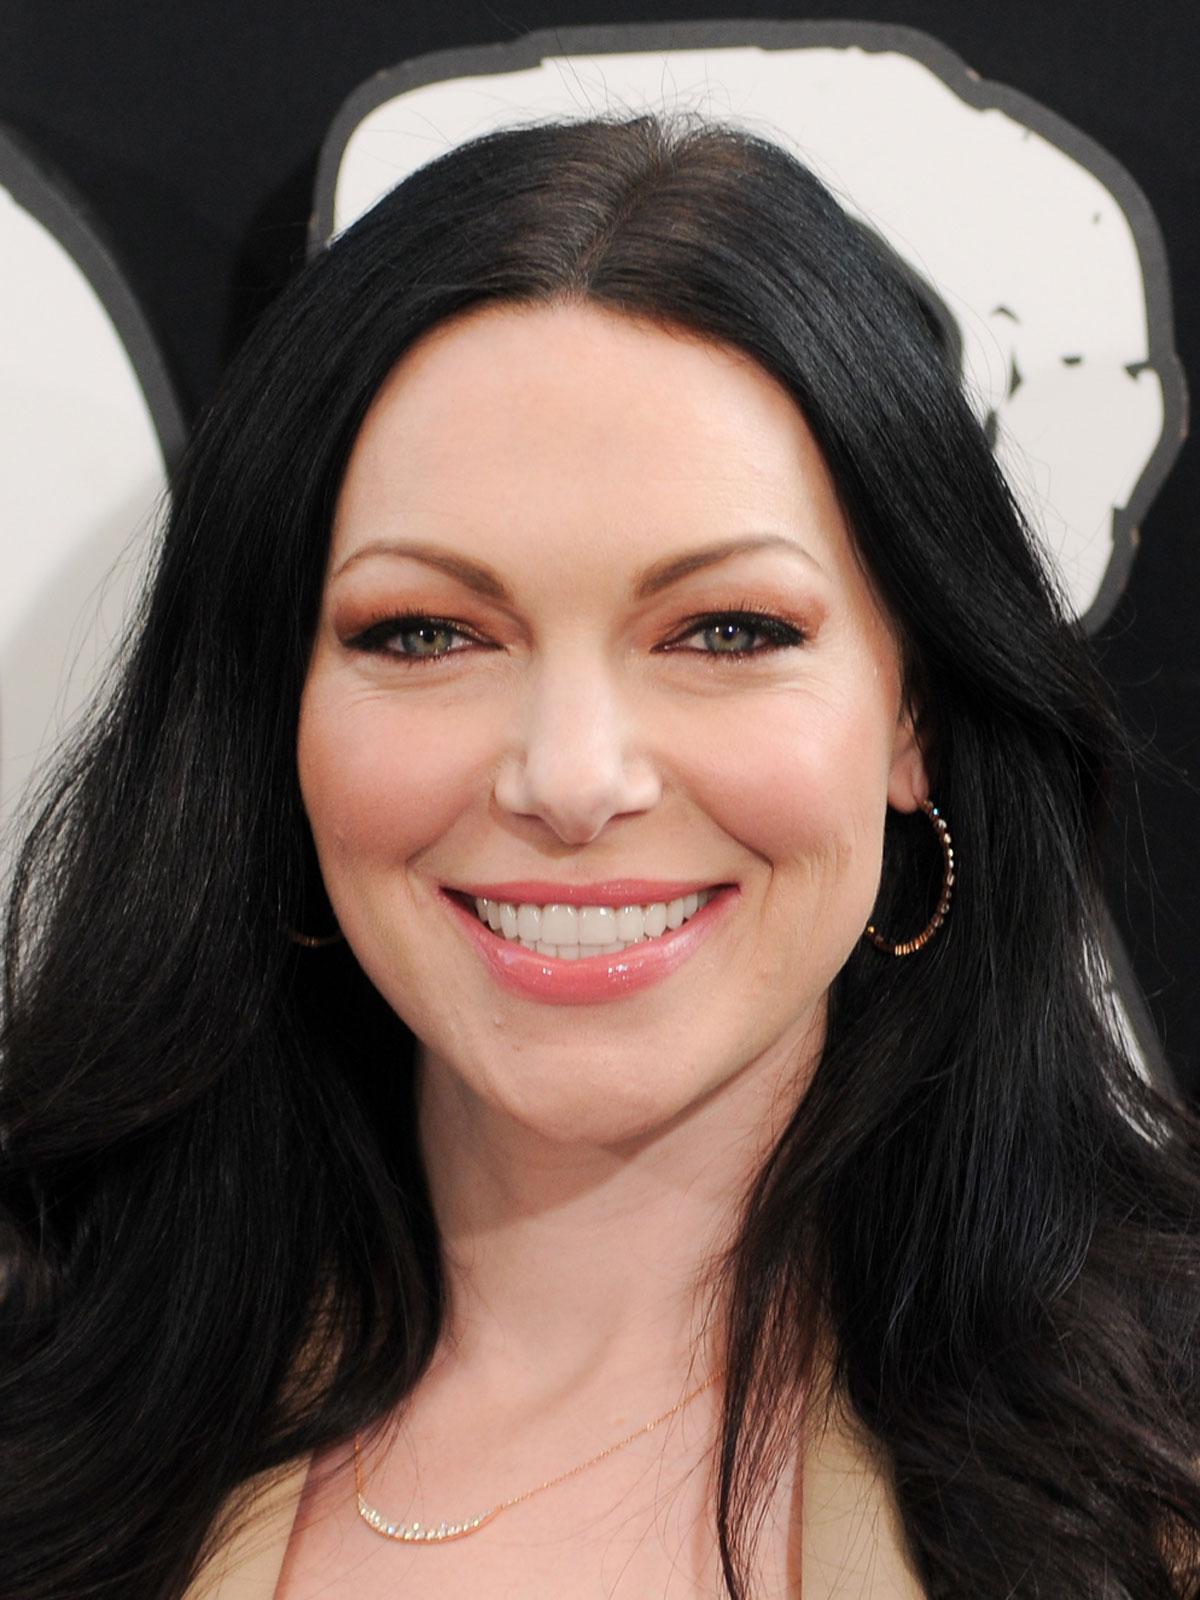 70+ Hot Pictures of Laura Prepon from Orange Is The New Black Will Get You Hot Under Collars 28